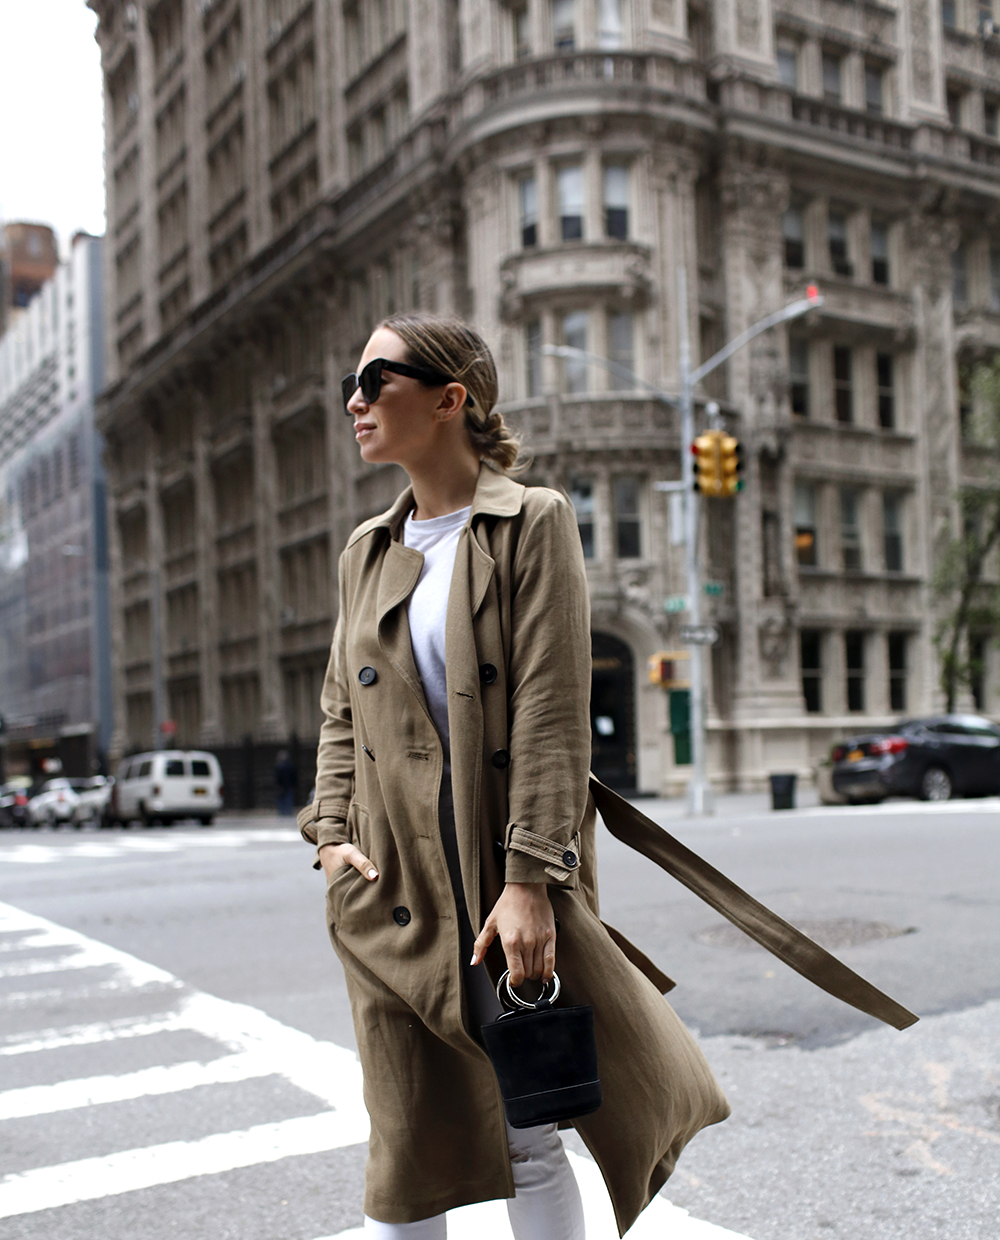 Helena of Brooklyn Blonde wearing Trench Coat and white shirt and pants